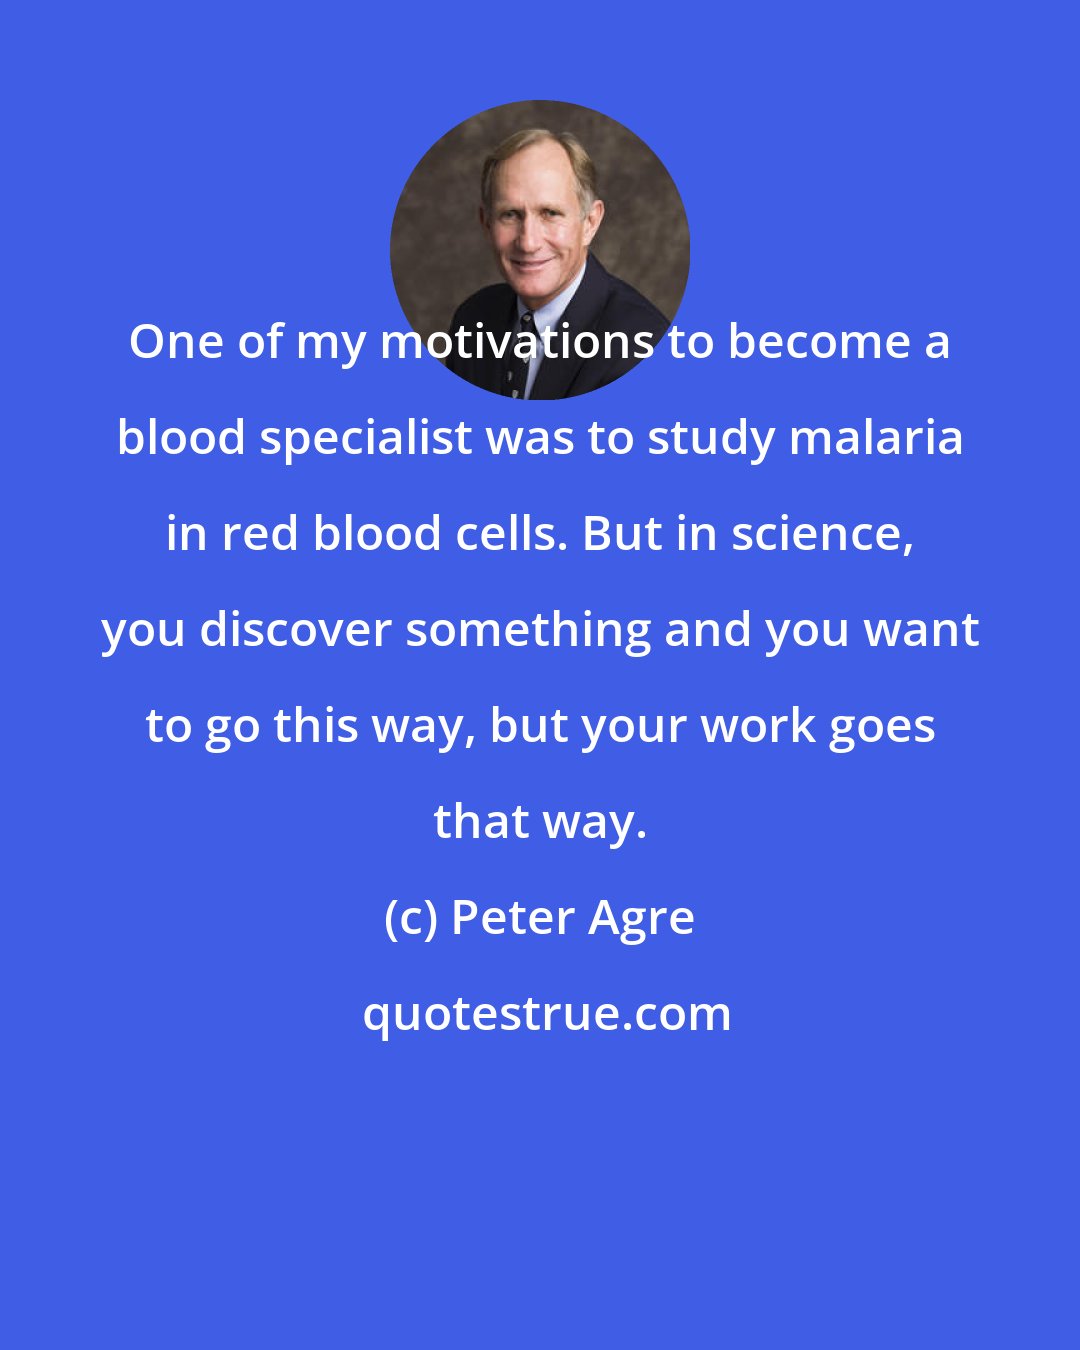 Peter Agre: One of my motivations to become a blood specialist was to study malaria in red blood cells. But in science, you discover something and you want to go this way, but your work goes that way.